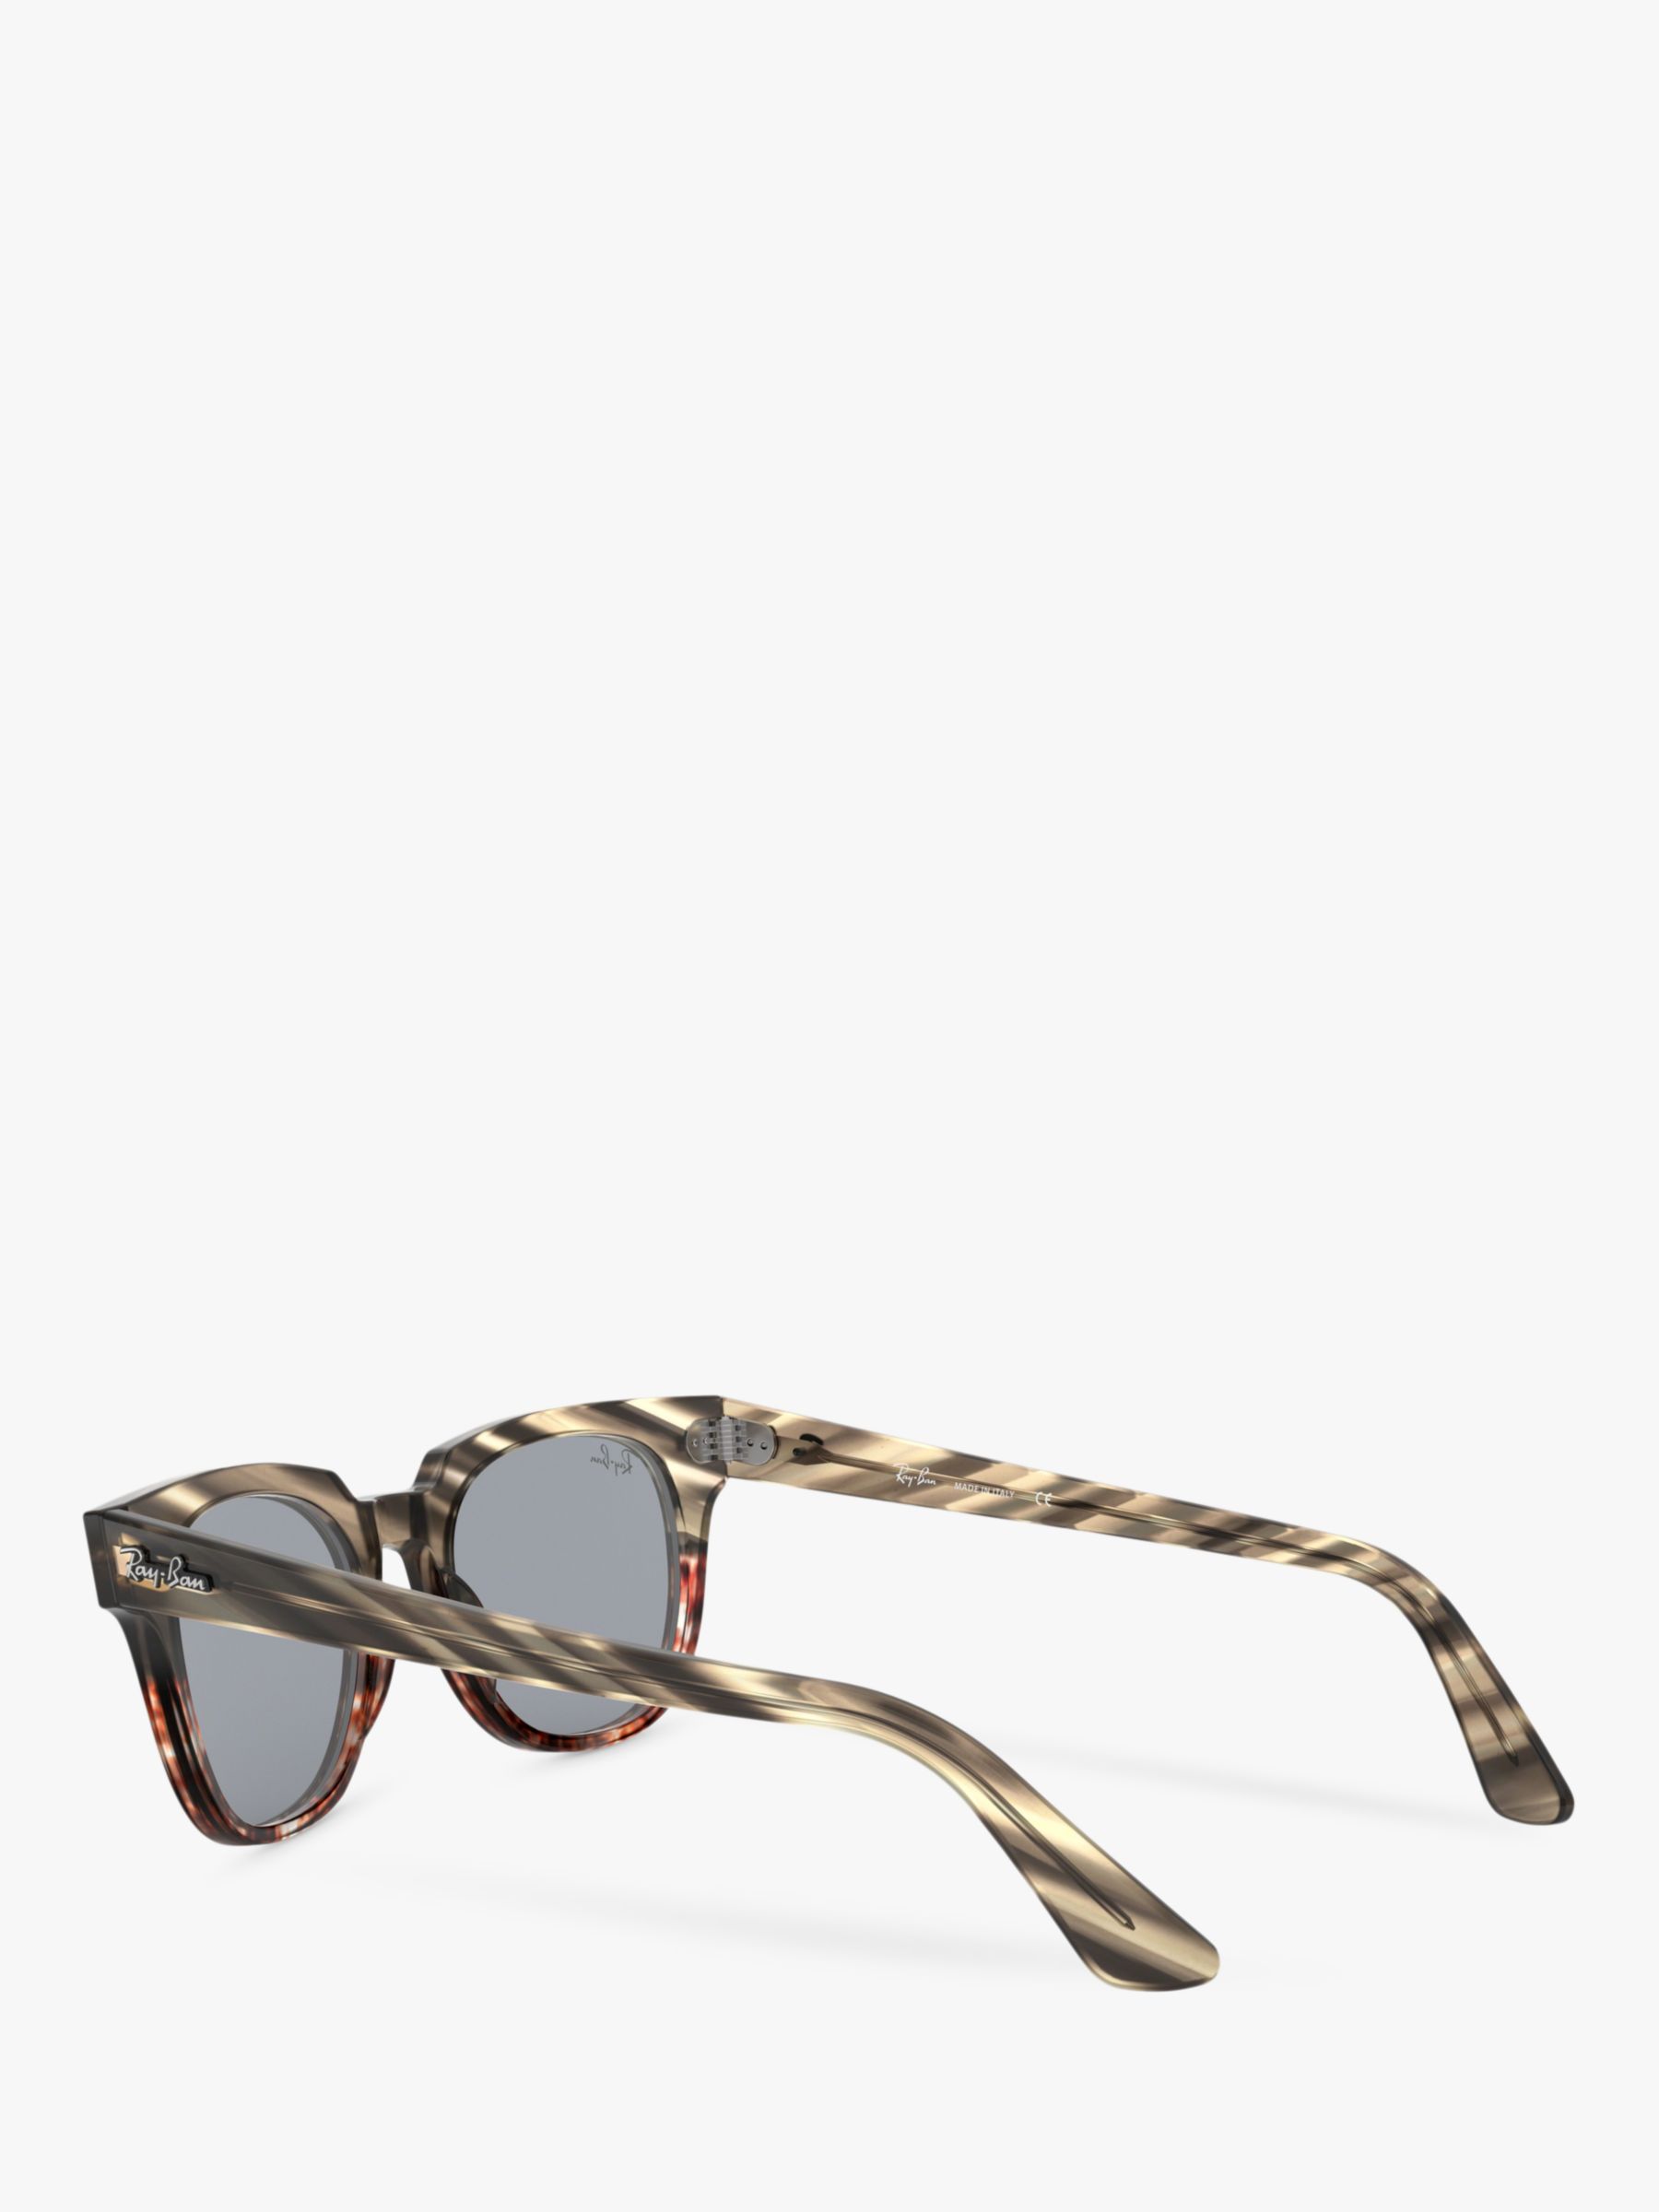 Ray-Ban RB2168 Unisex Square Sunglasses, Brown Striped/Grey Gradient